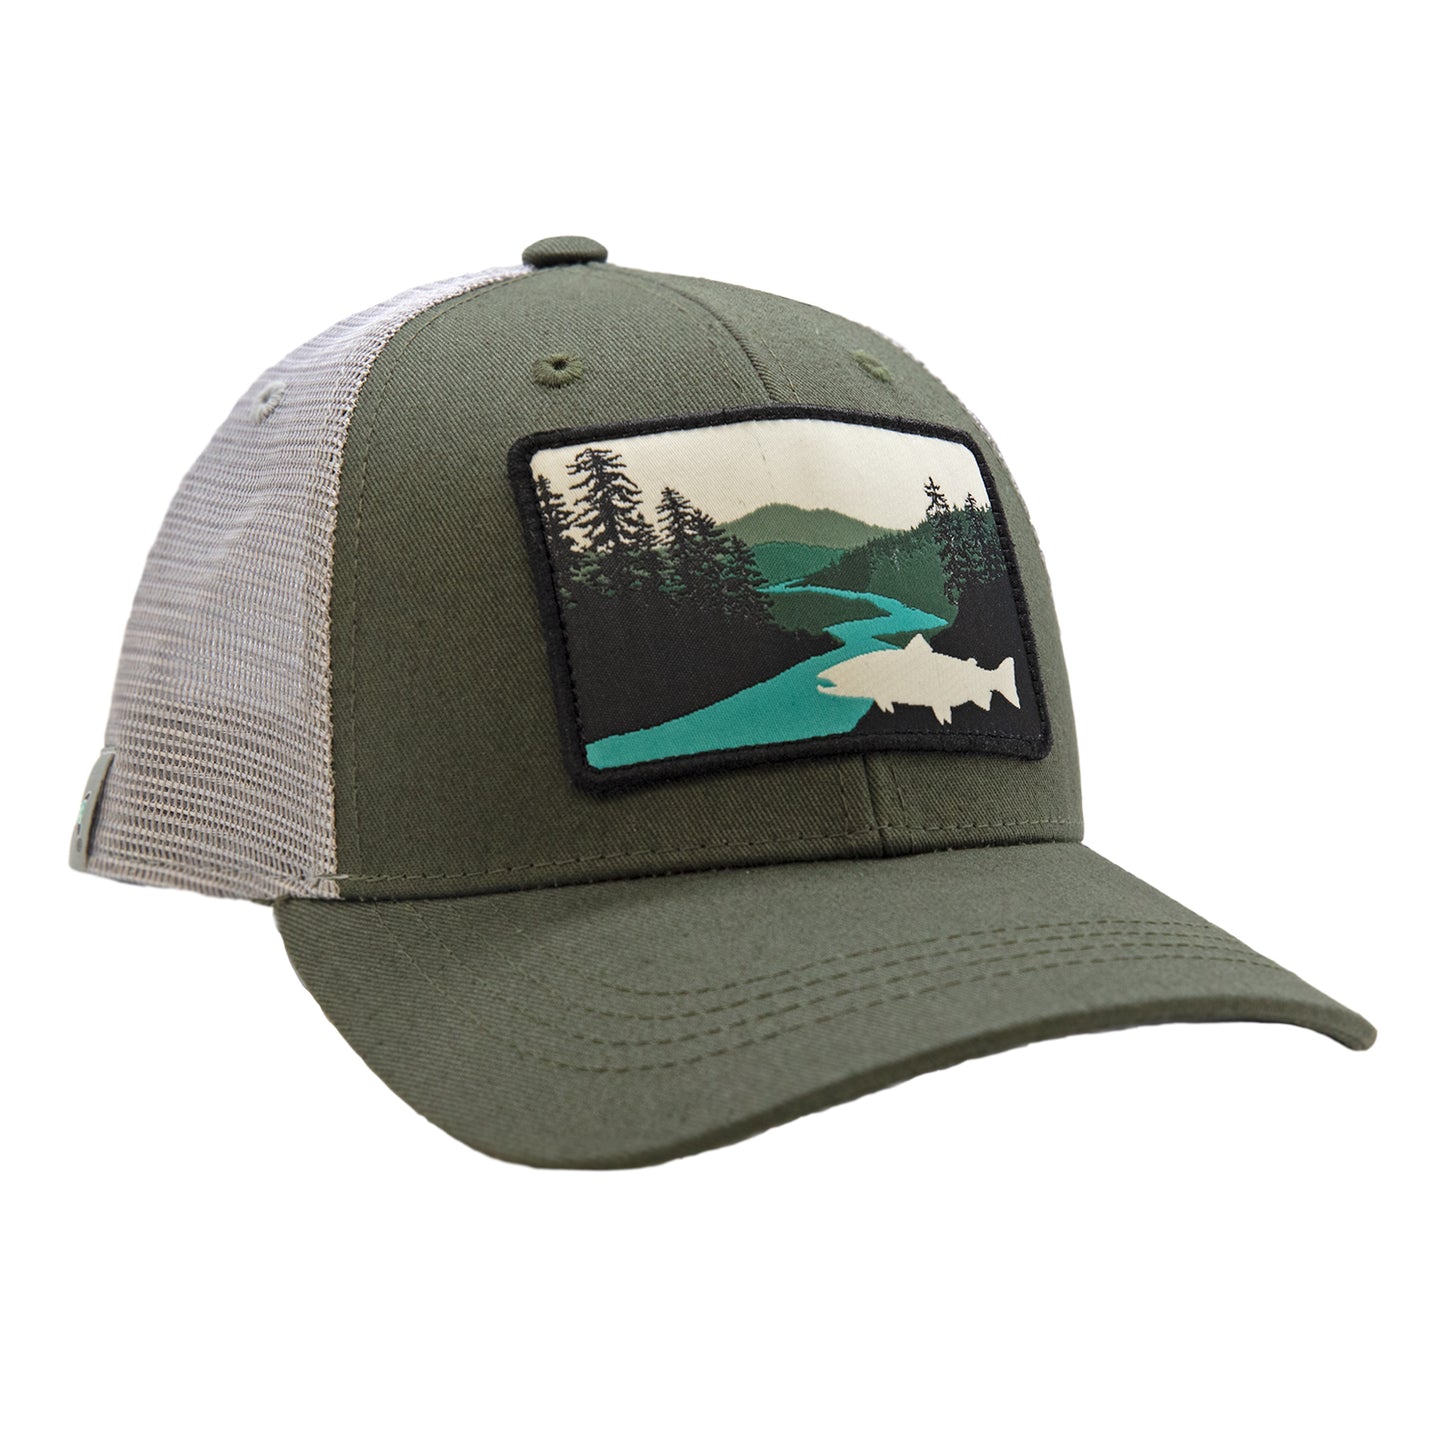 Green hat with white mesh back with a patch on the front that shows mountains, pine trees, and a river with a white silhouette of a fish